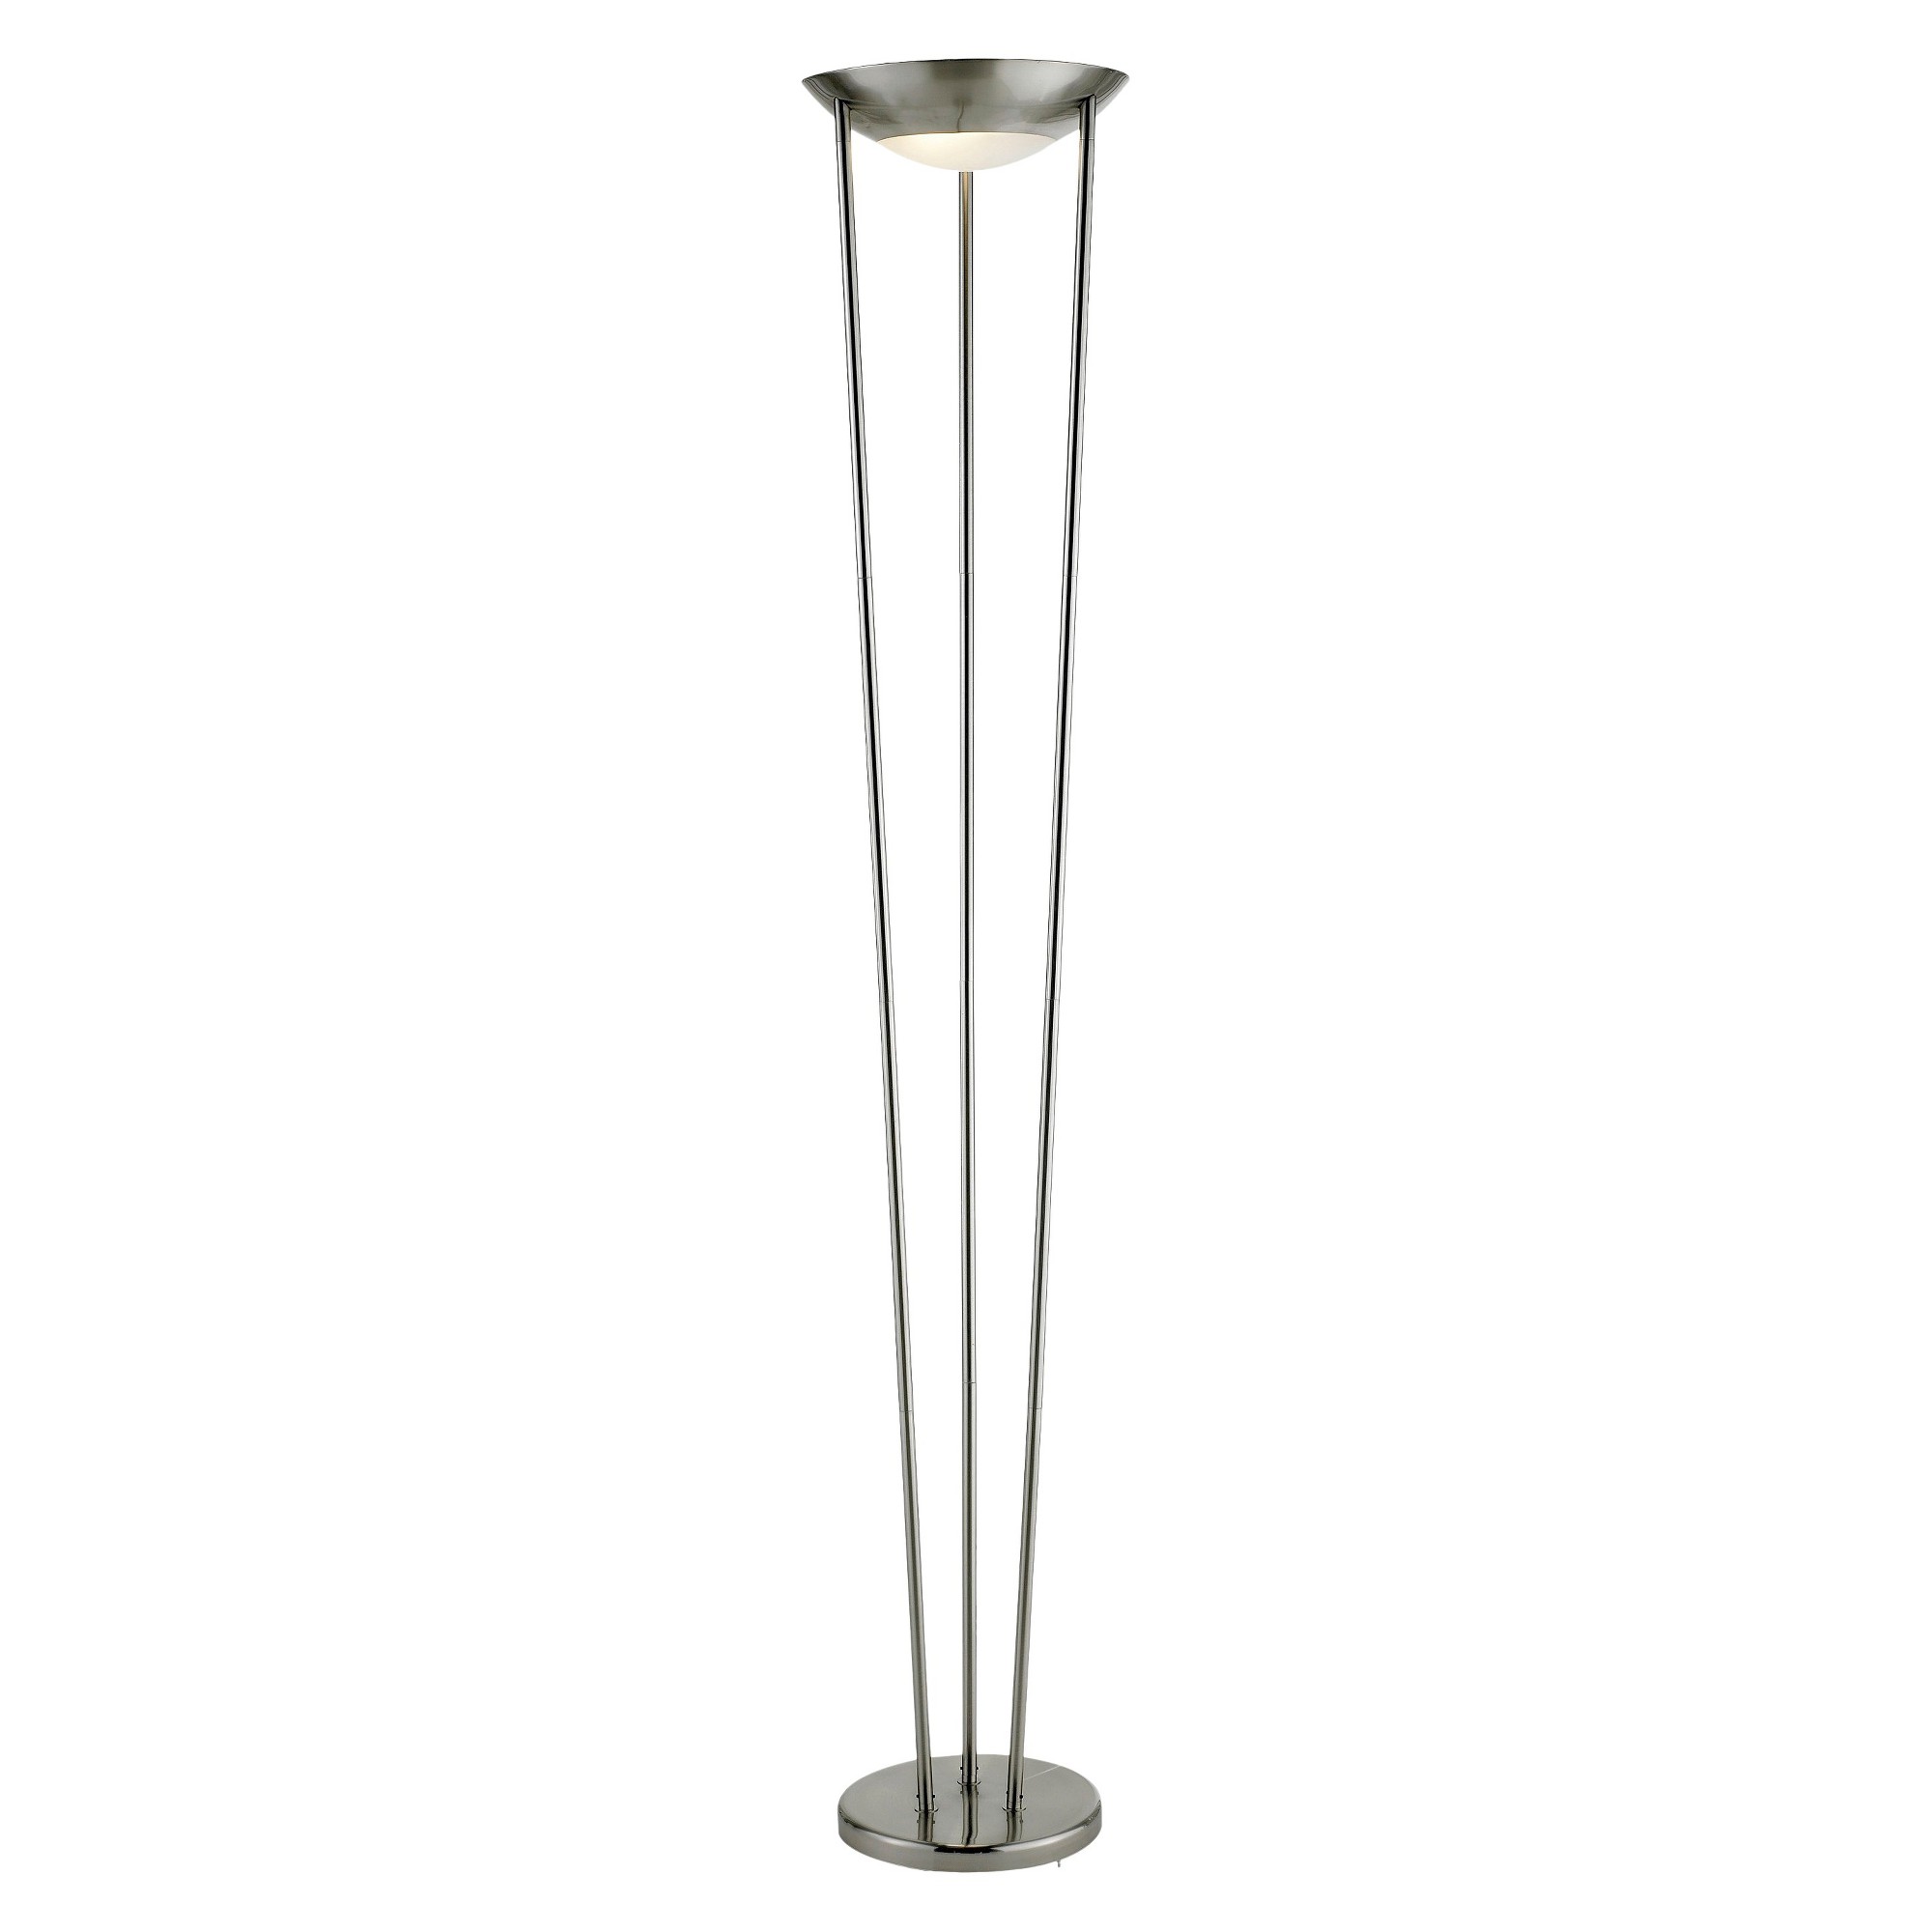 Adesso Odyssey Tall Floor Lamp Silver (Lamp Only)